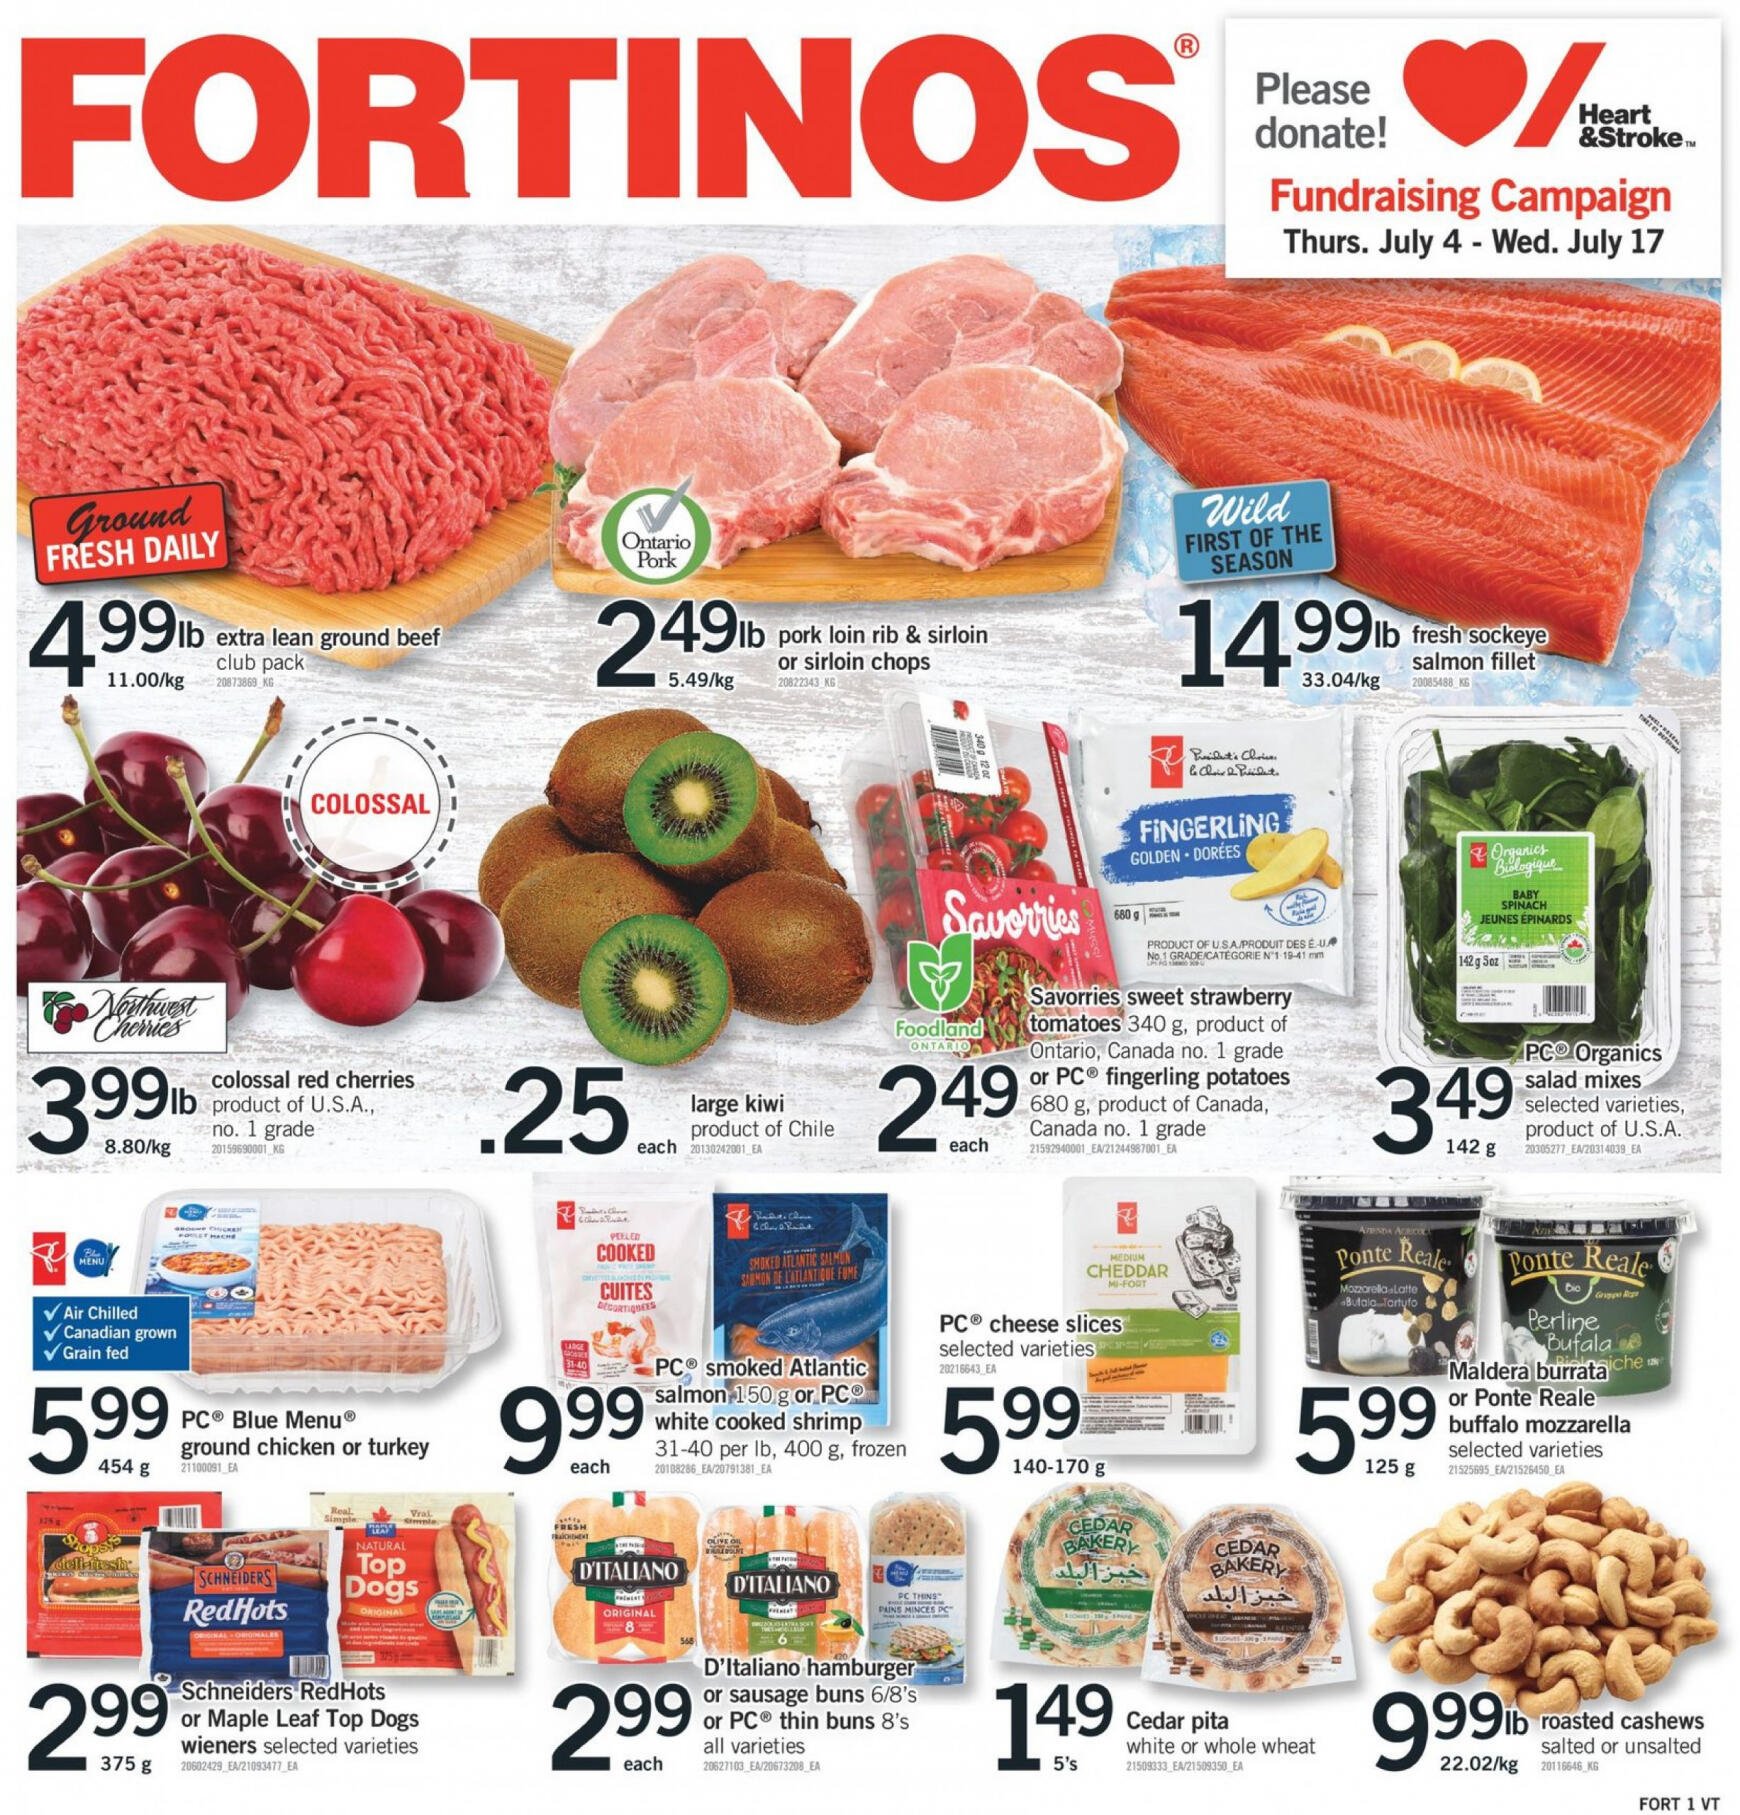 fortinos - Fortinos flyer current 04.07. - 10.07.